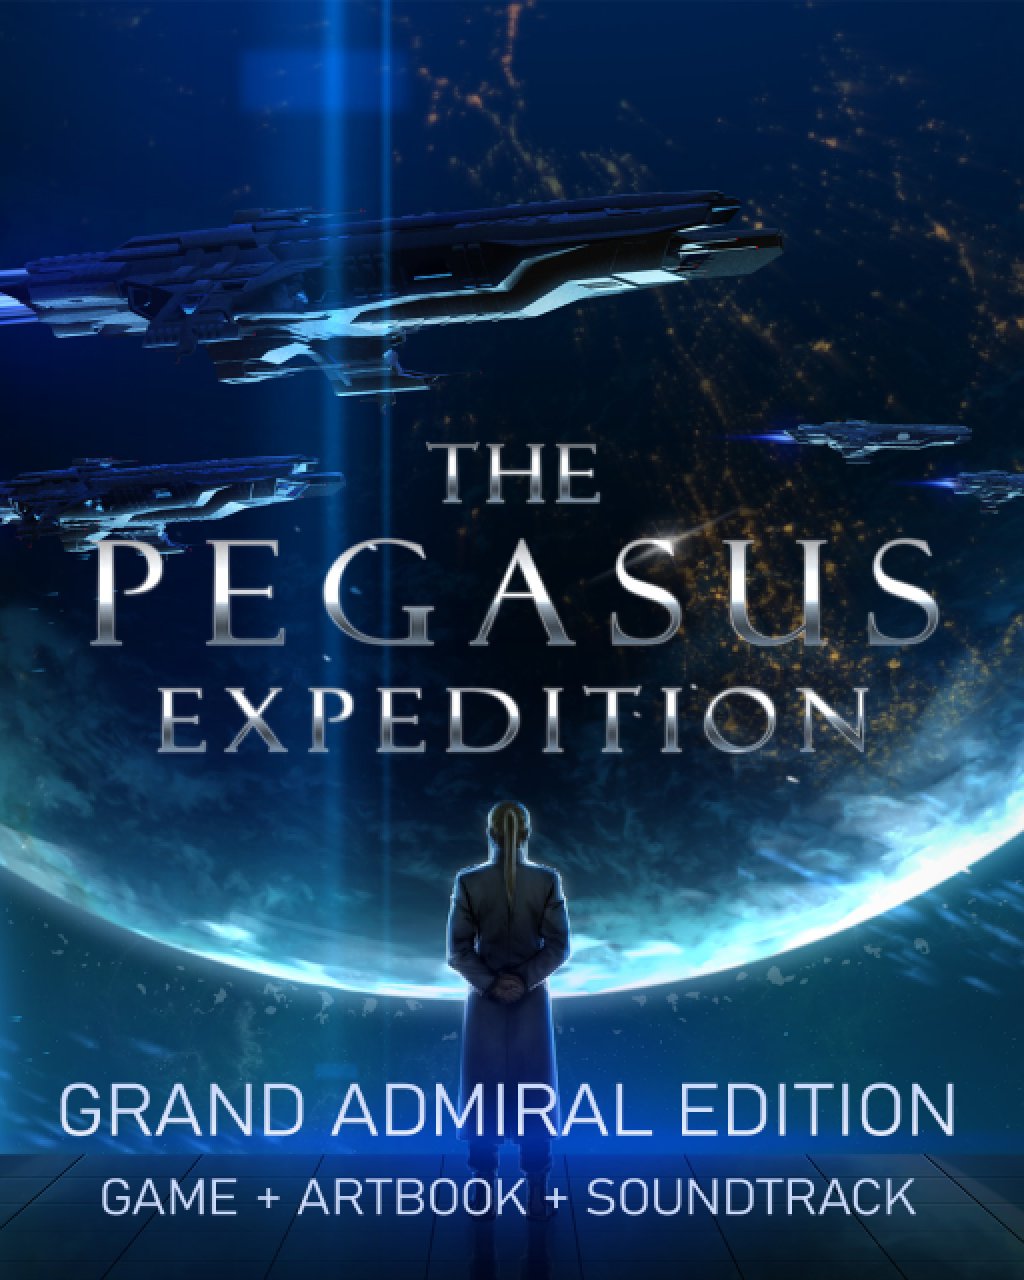 The Pegasus Expedition Grand Admiral Edition